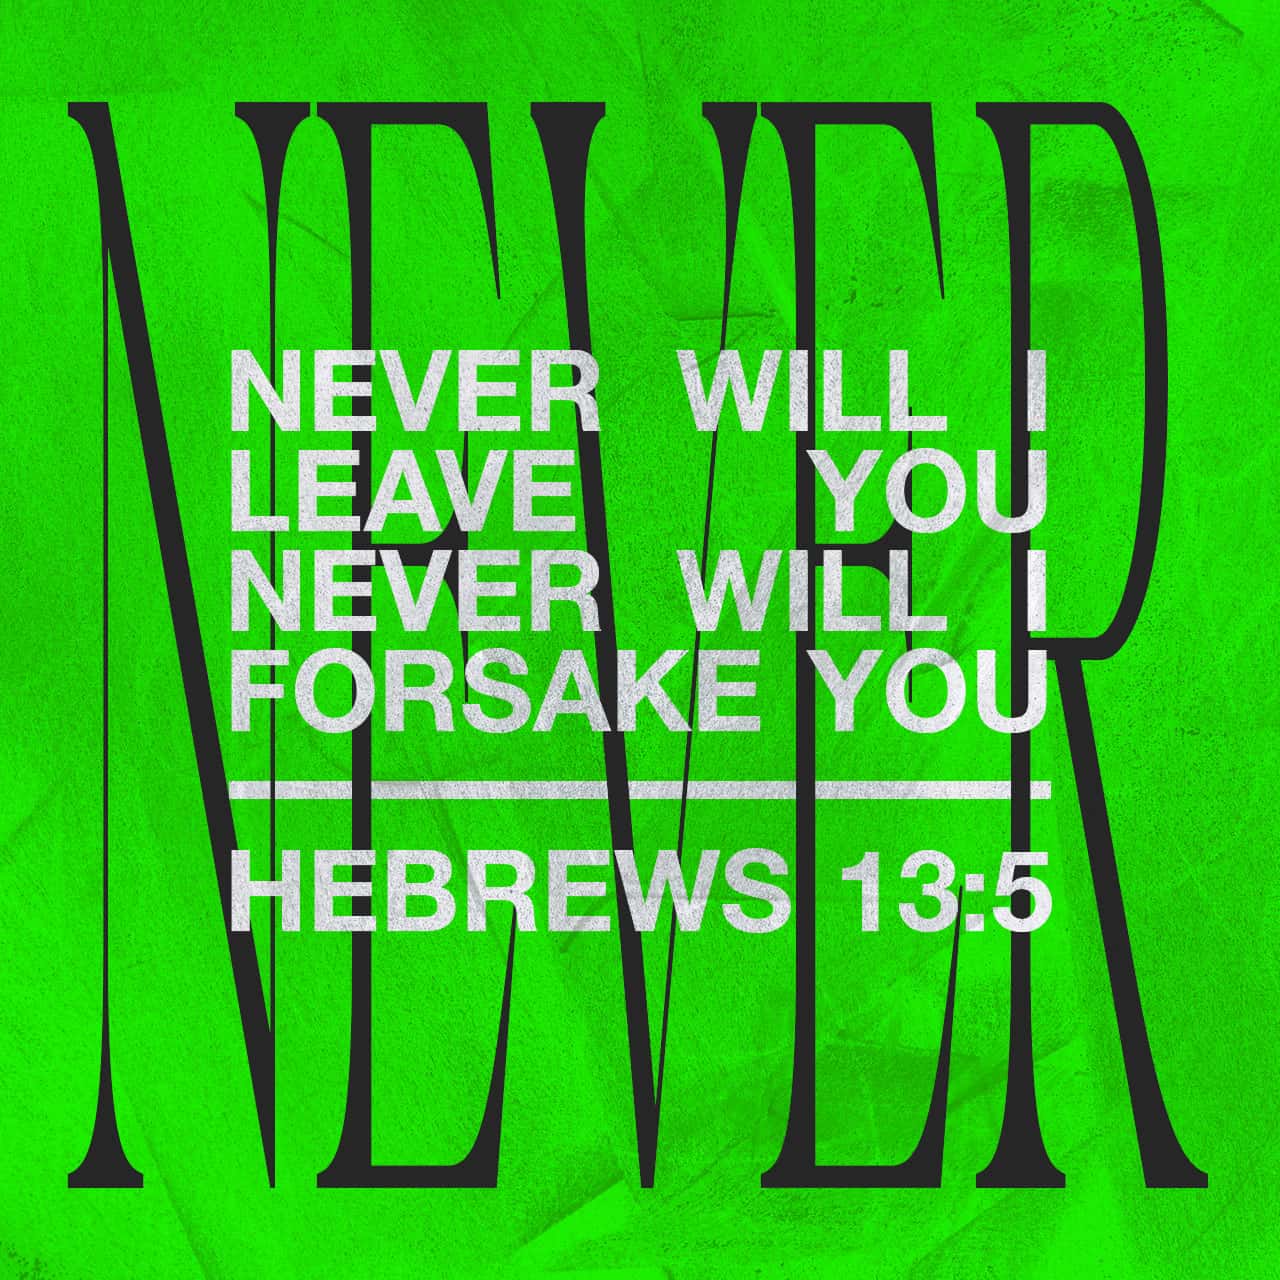 Hebrews 13:5, 18 Keep your lives free from the love of money and be ...